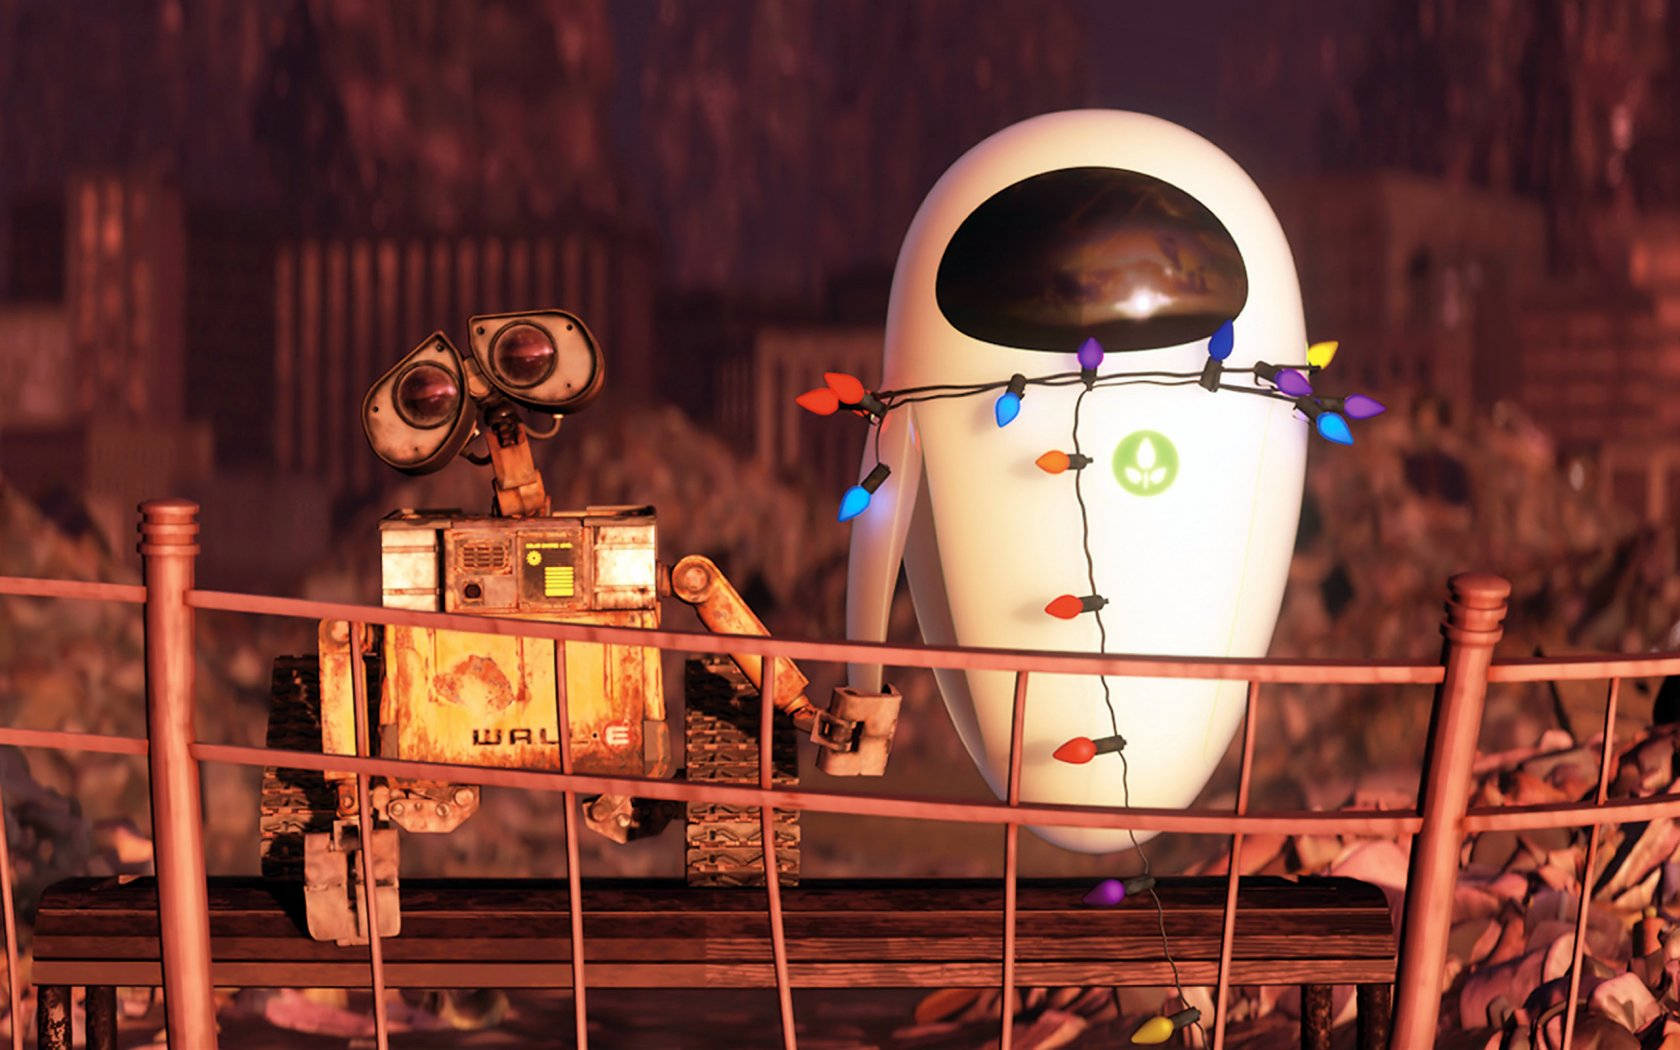 EVE And WALL E Wallpaper